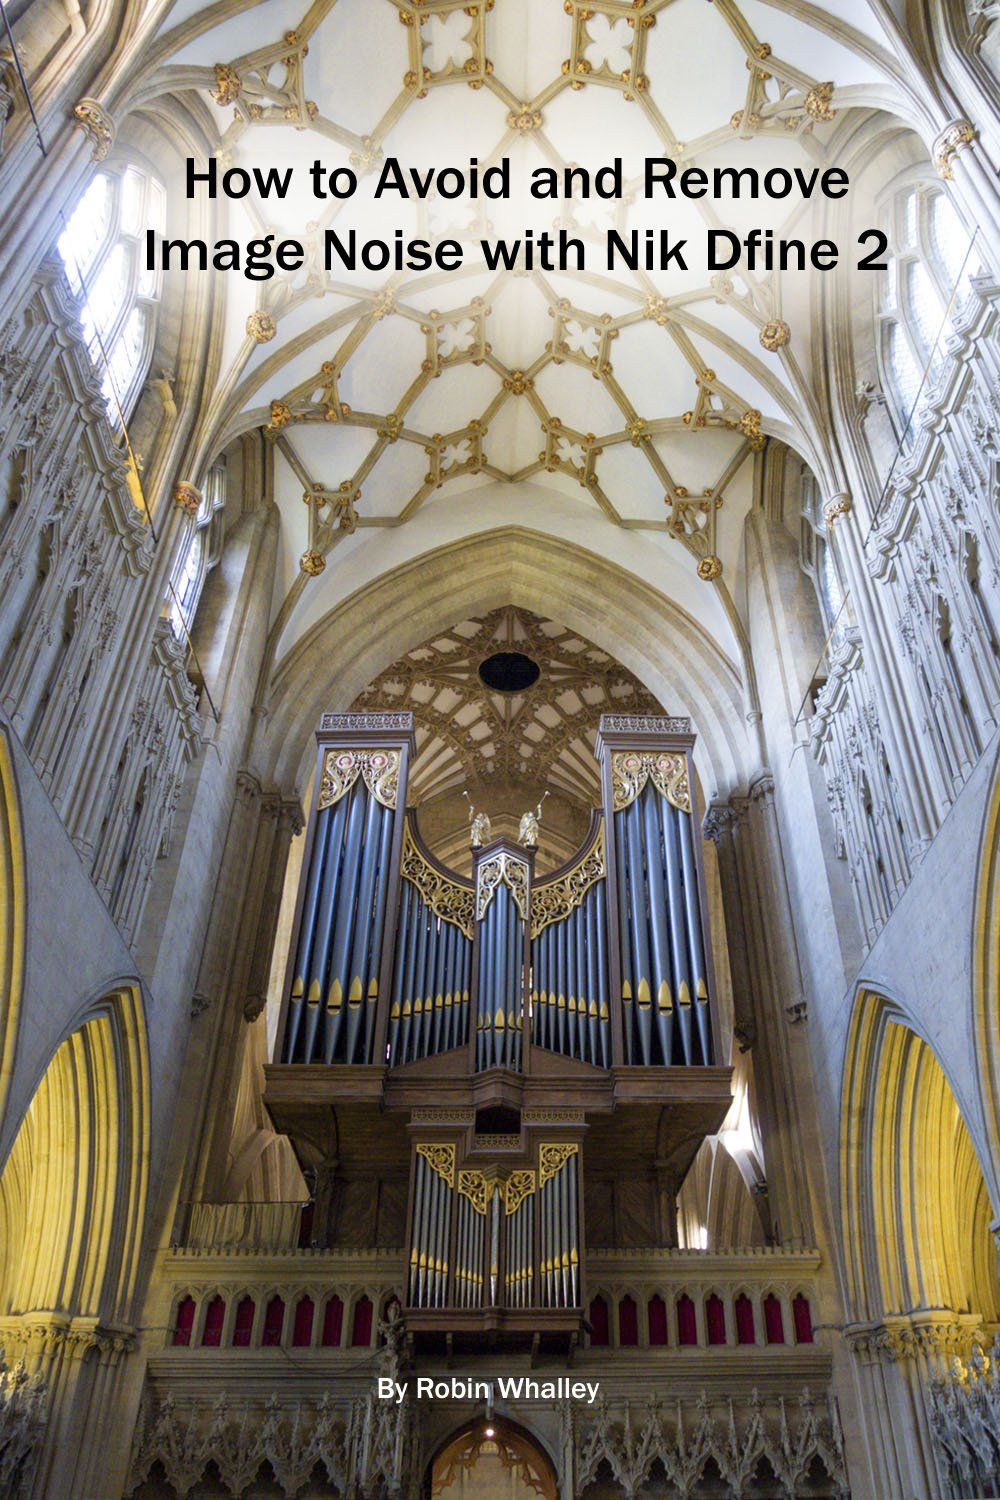 How To Avoid And Remove Image Noise With Nik Dfine 2